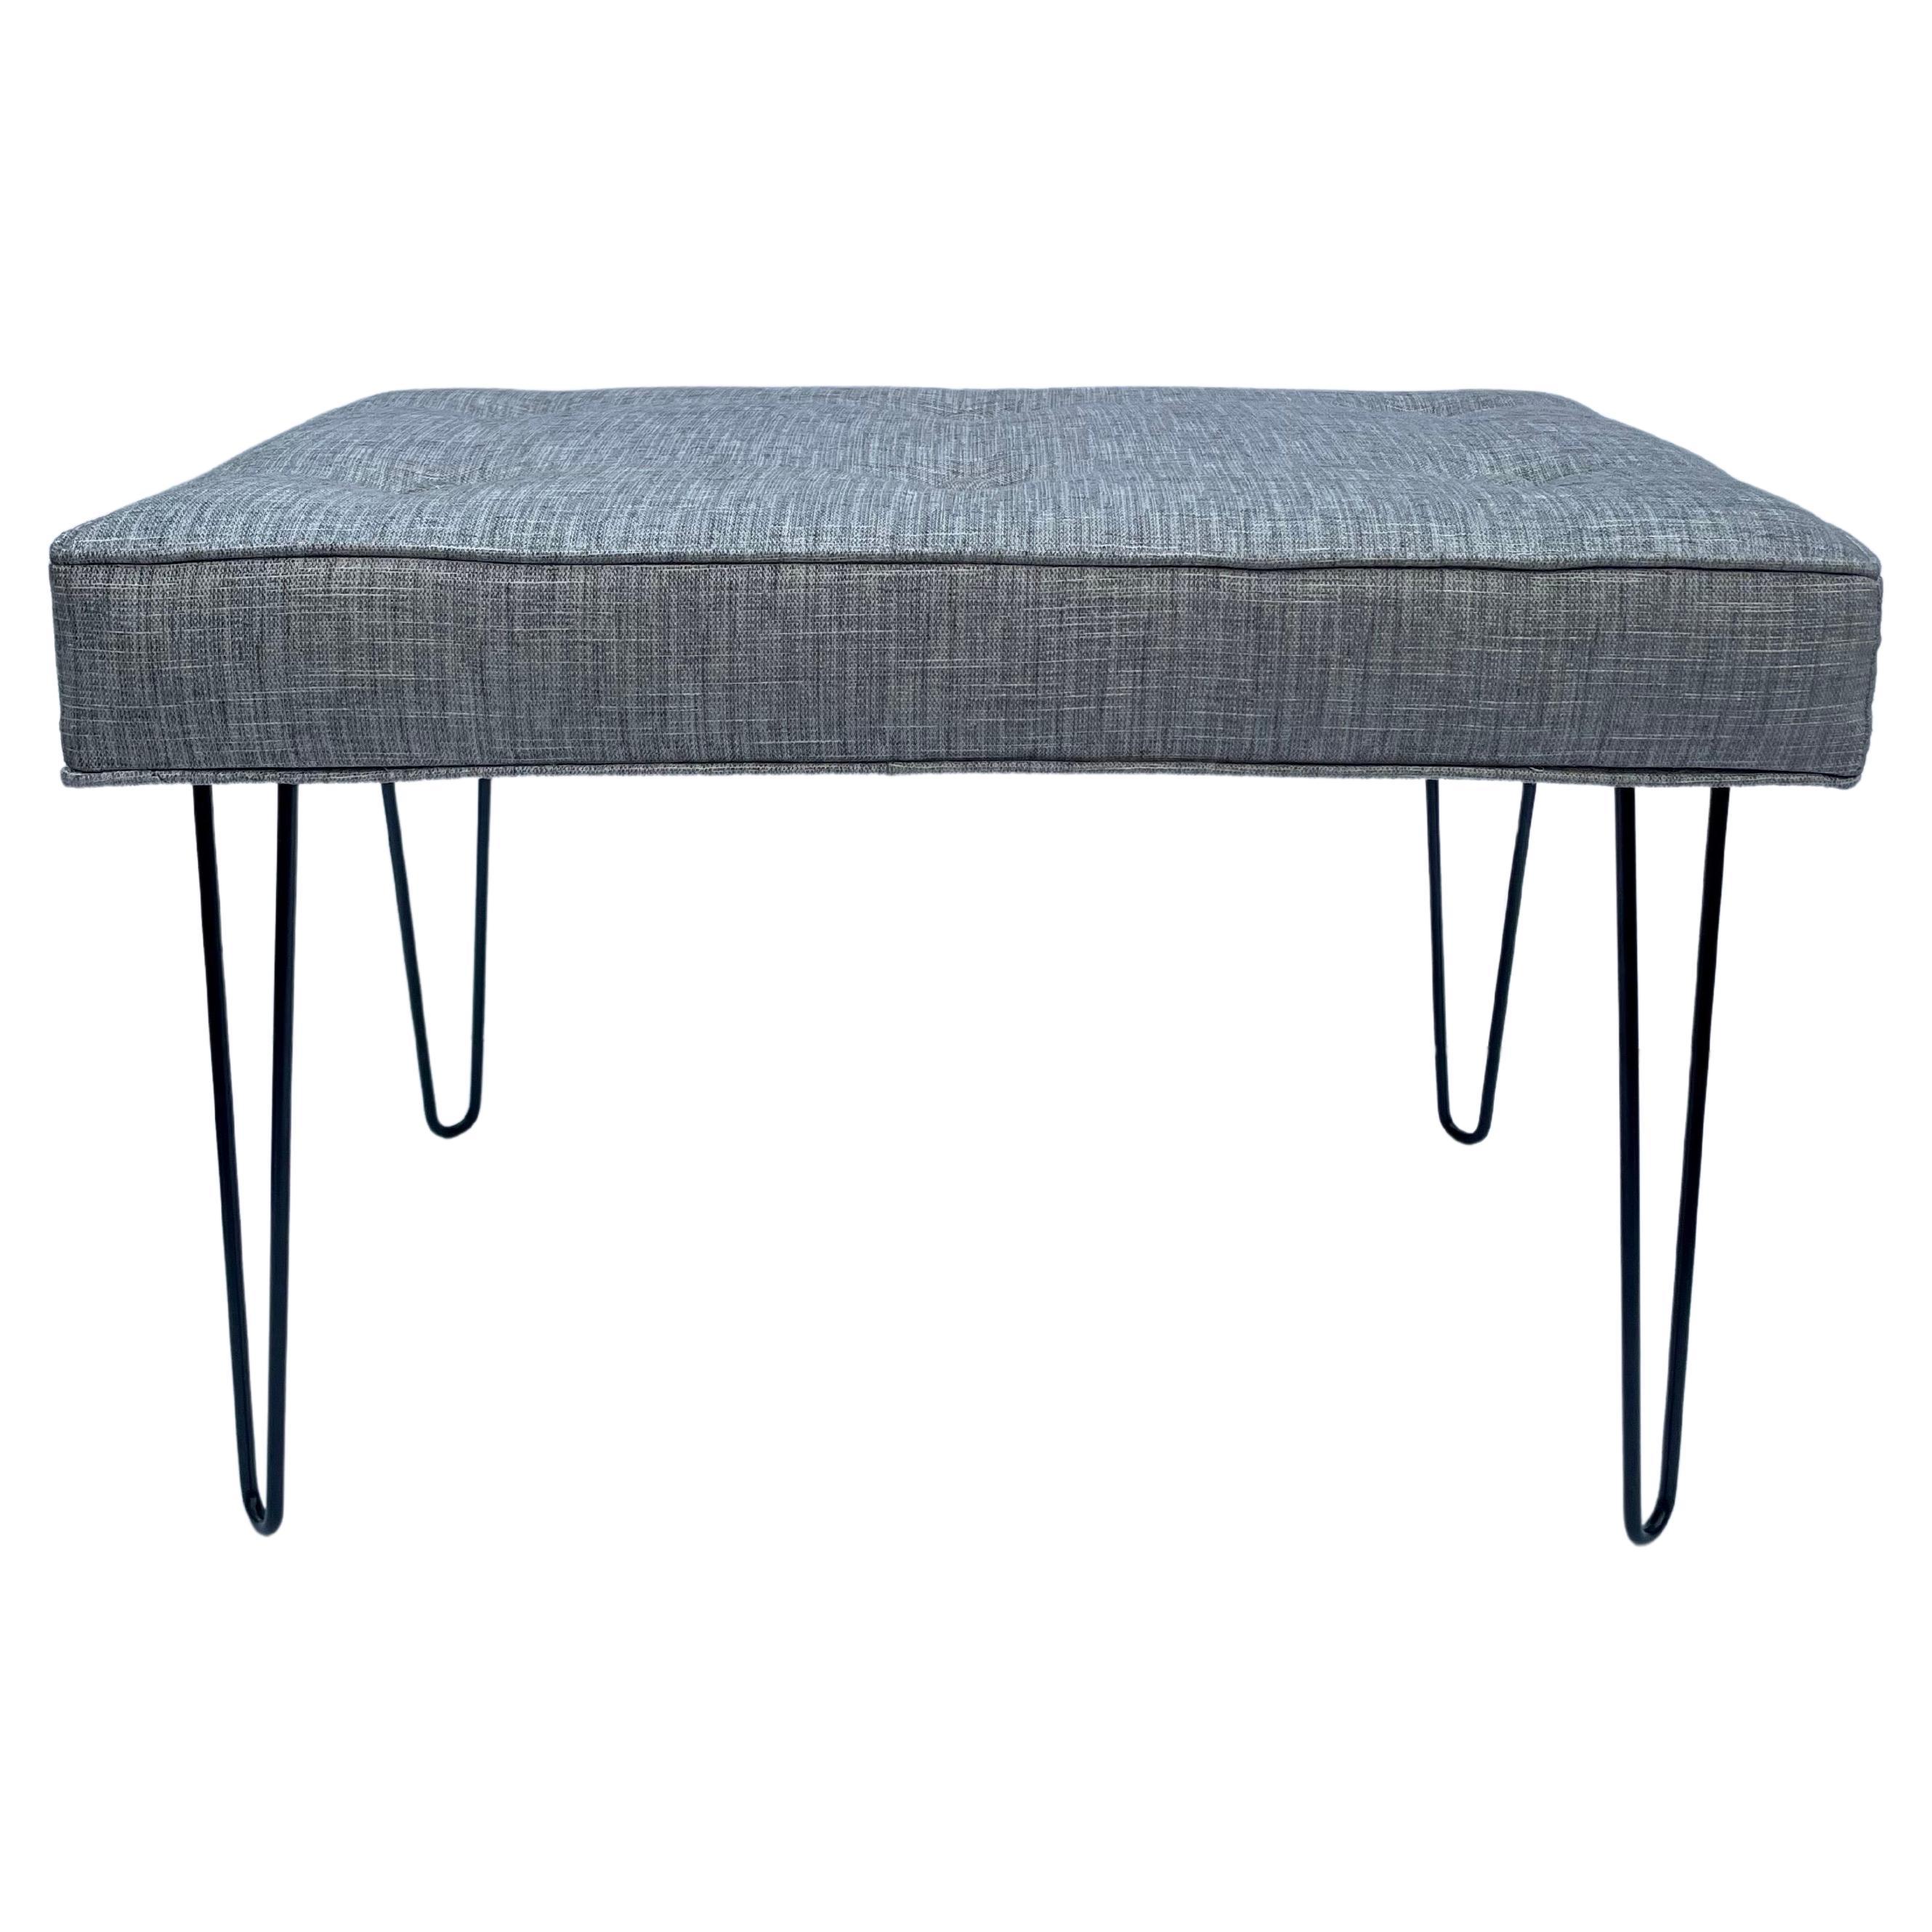 Circa 21st century pair of Mid-Century Modern style newly made upholstered benchs with satin black powder coated hairpin-shaped legs and new upholstered seats with six buttons each, welting top and bottom. 30